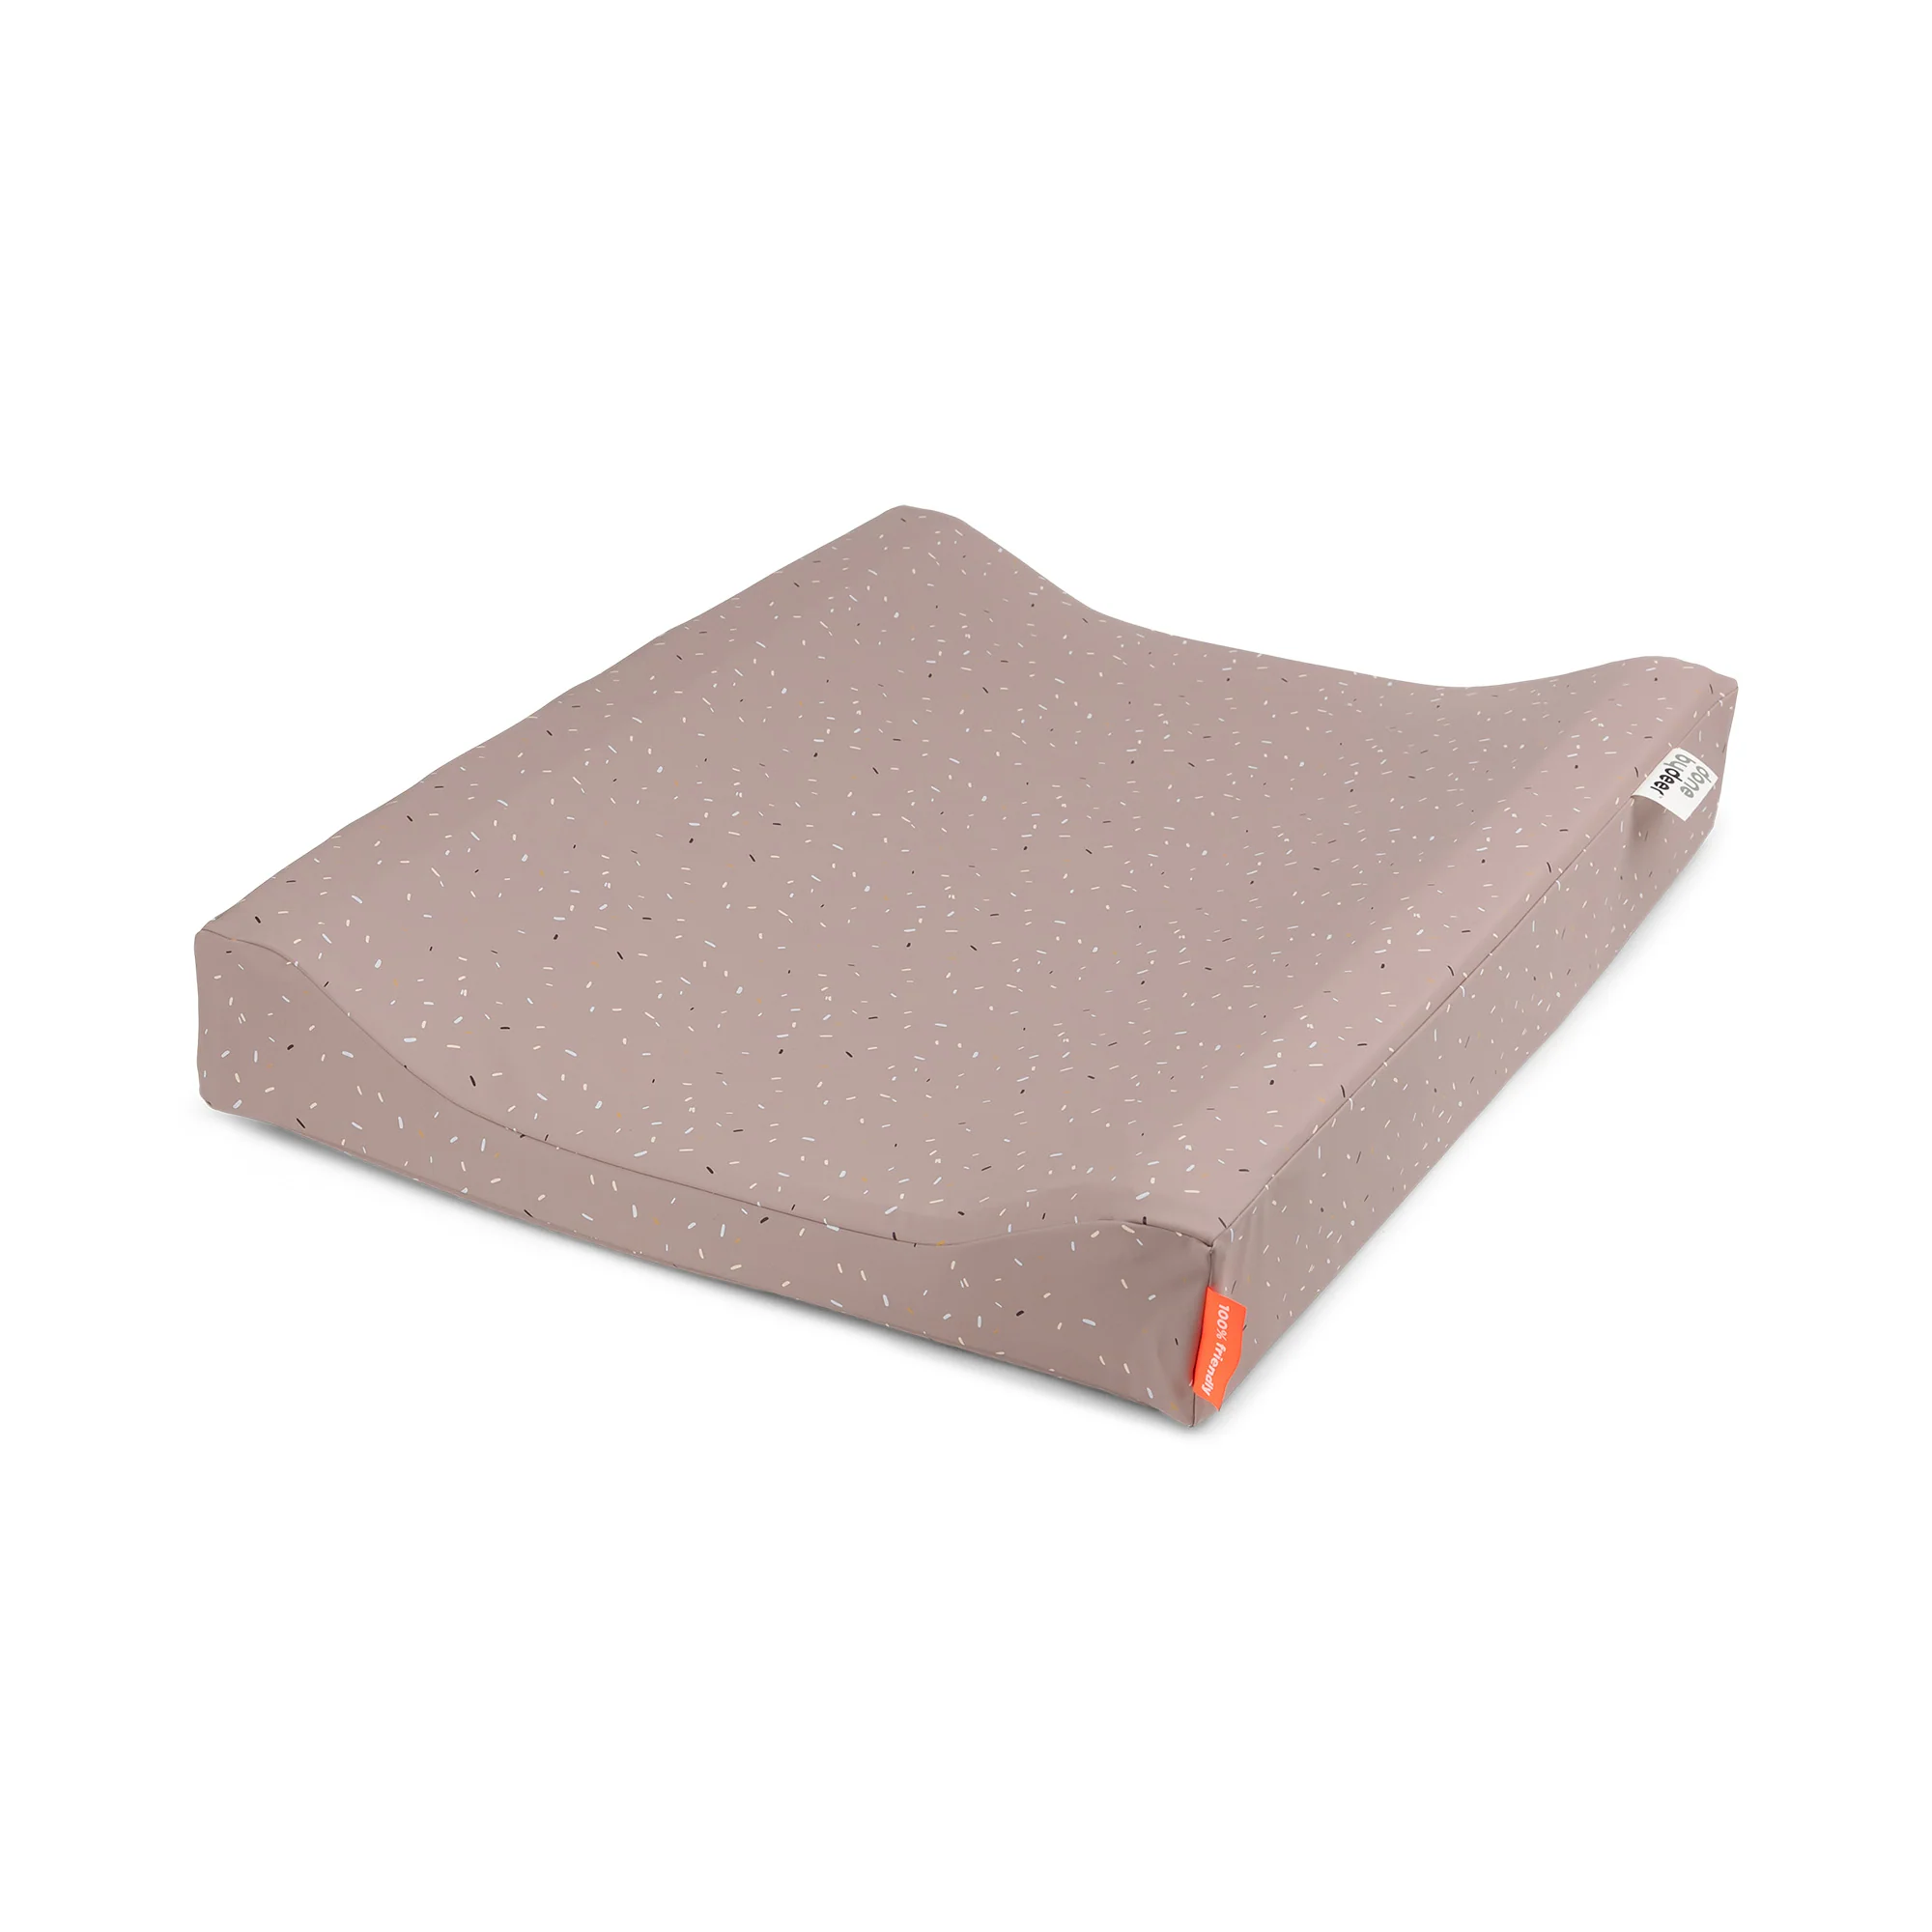 Changing-pad-easy-wipe-Confetti-Powder-Front-1_3000x